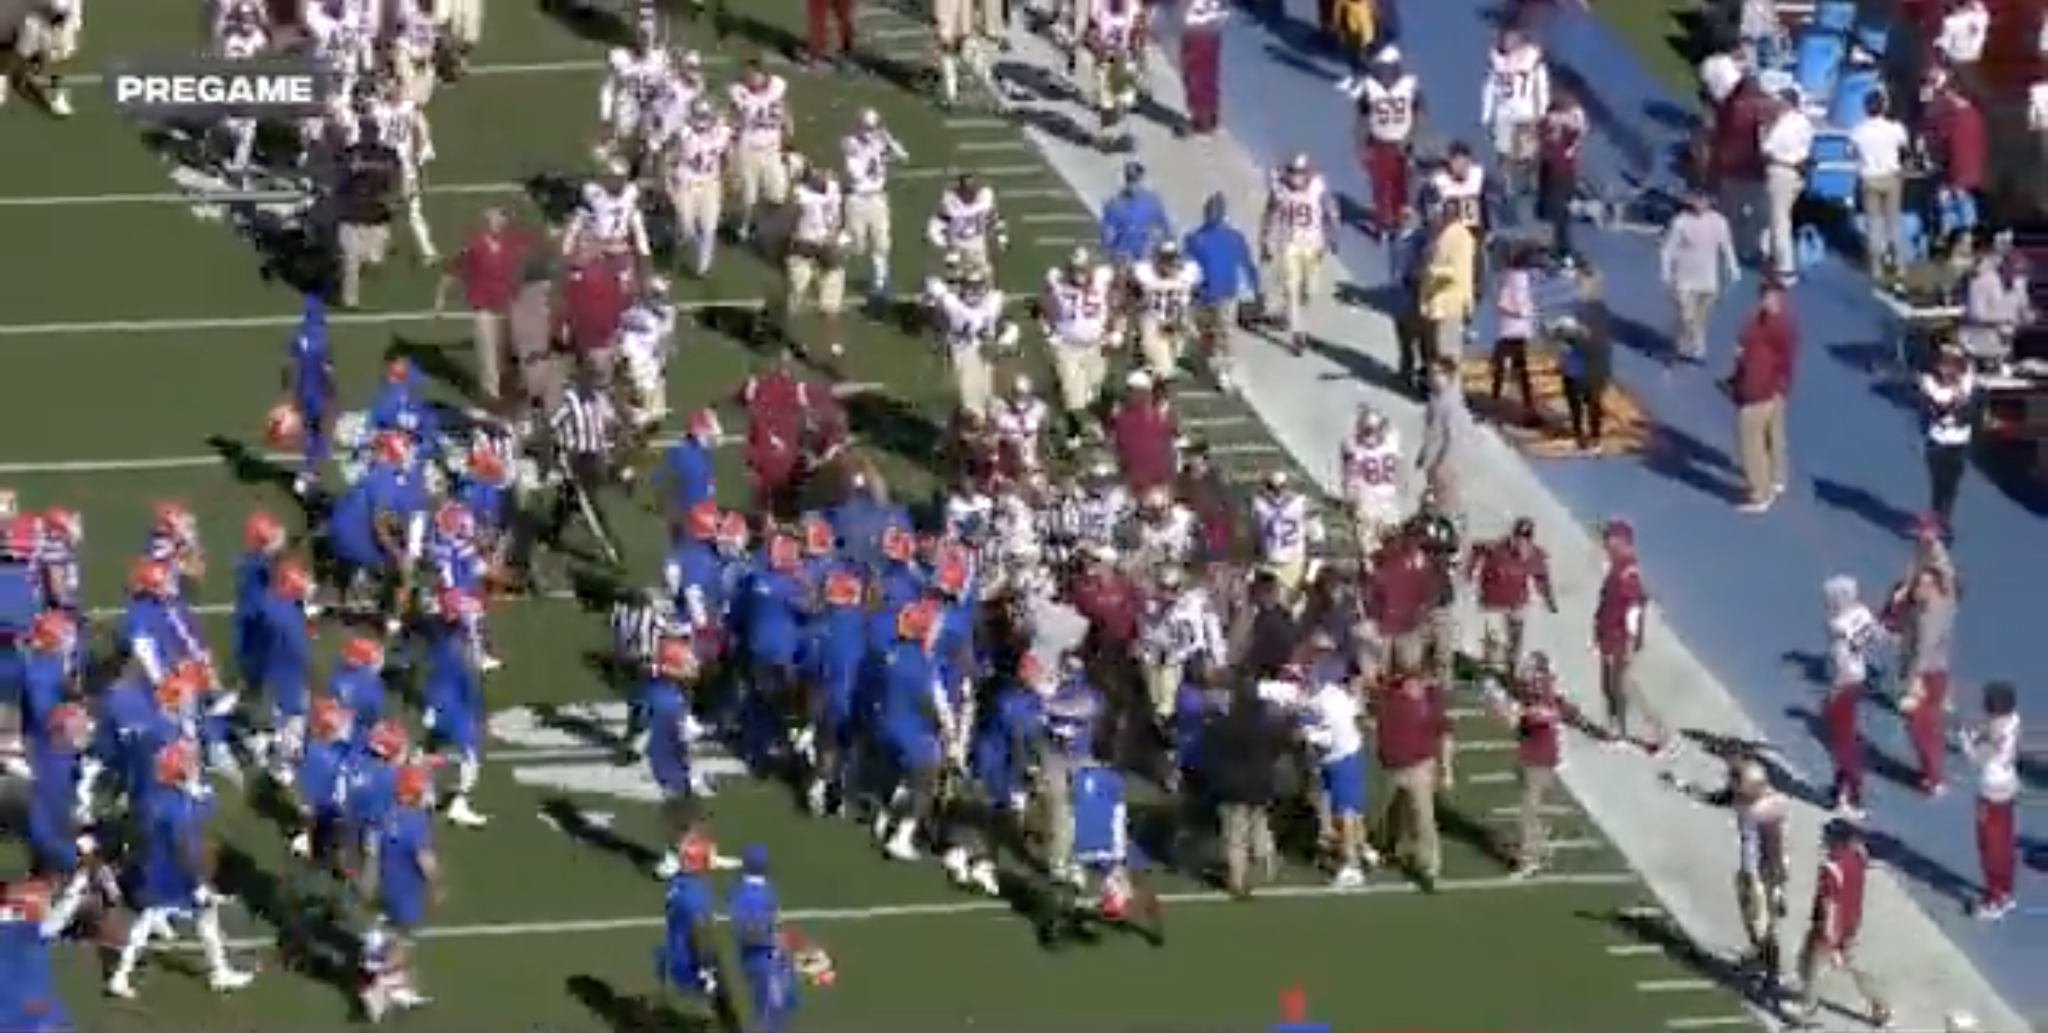 Florida, Florida State Players Separated In Pregame After Scuffle (Video)